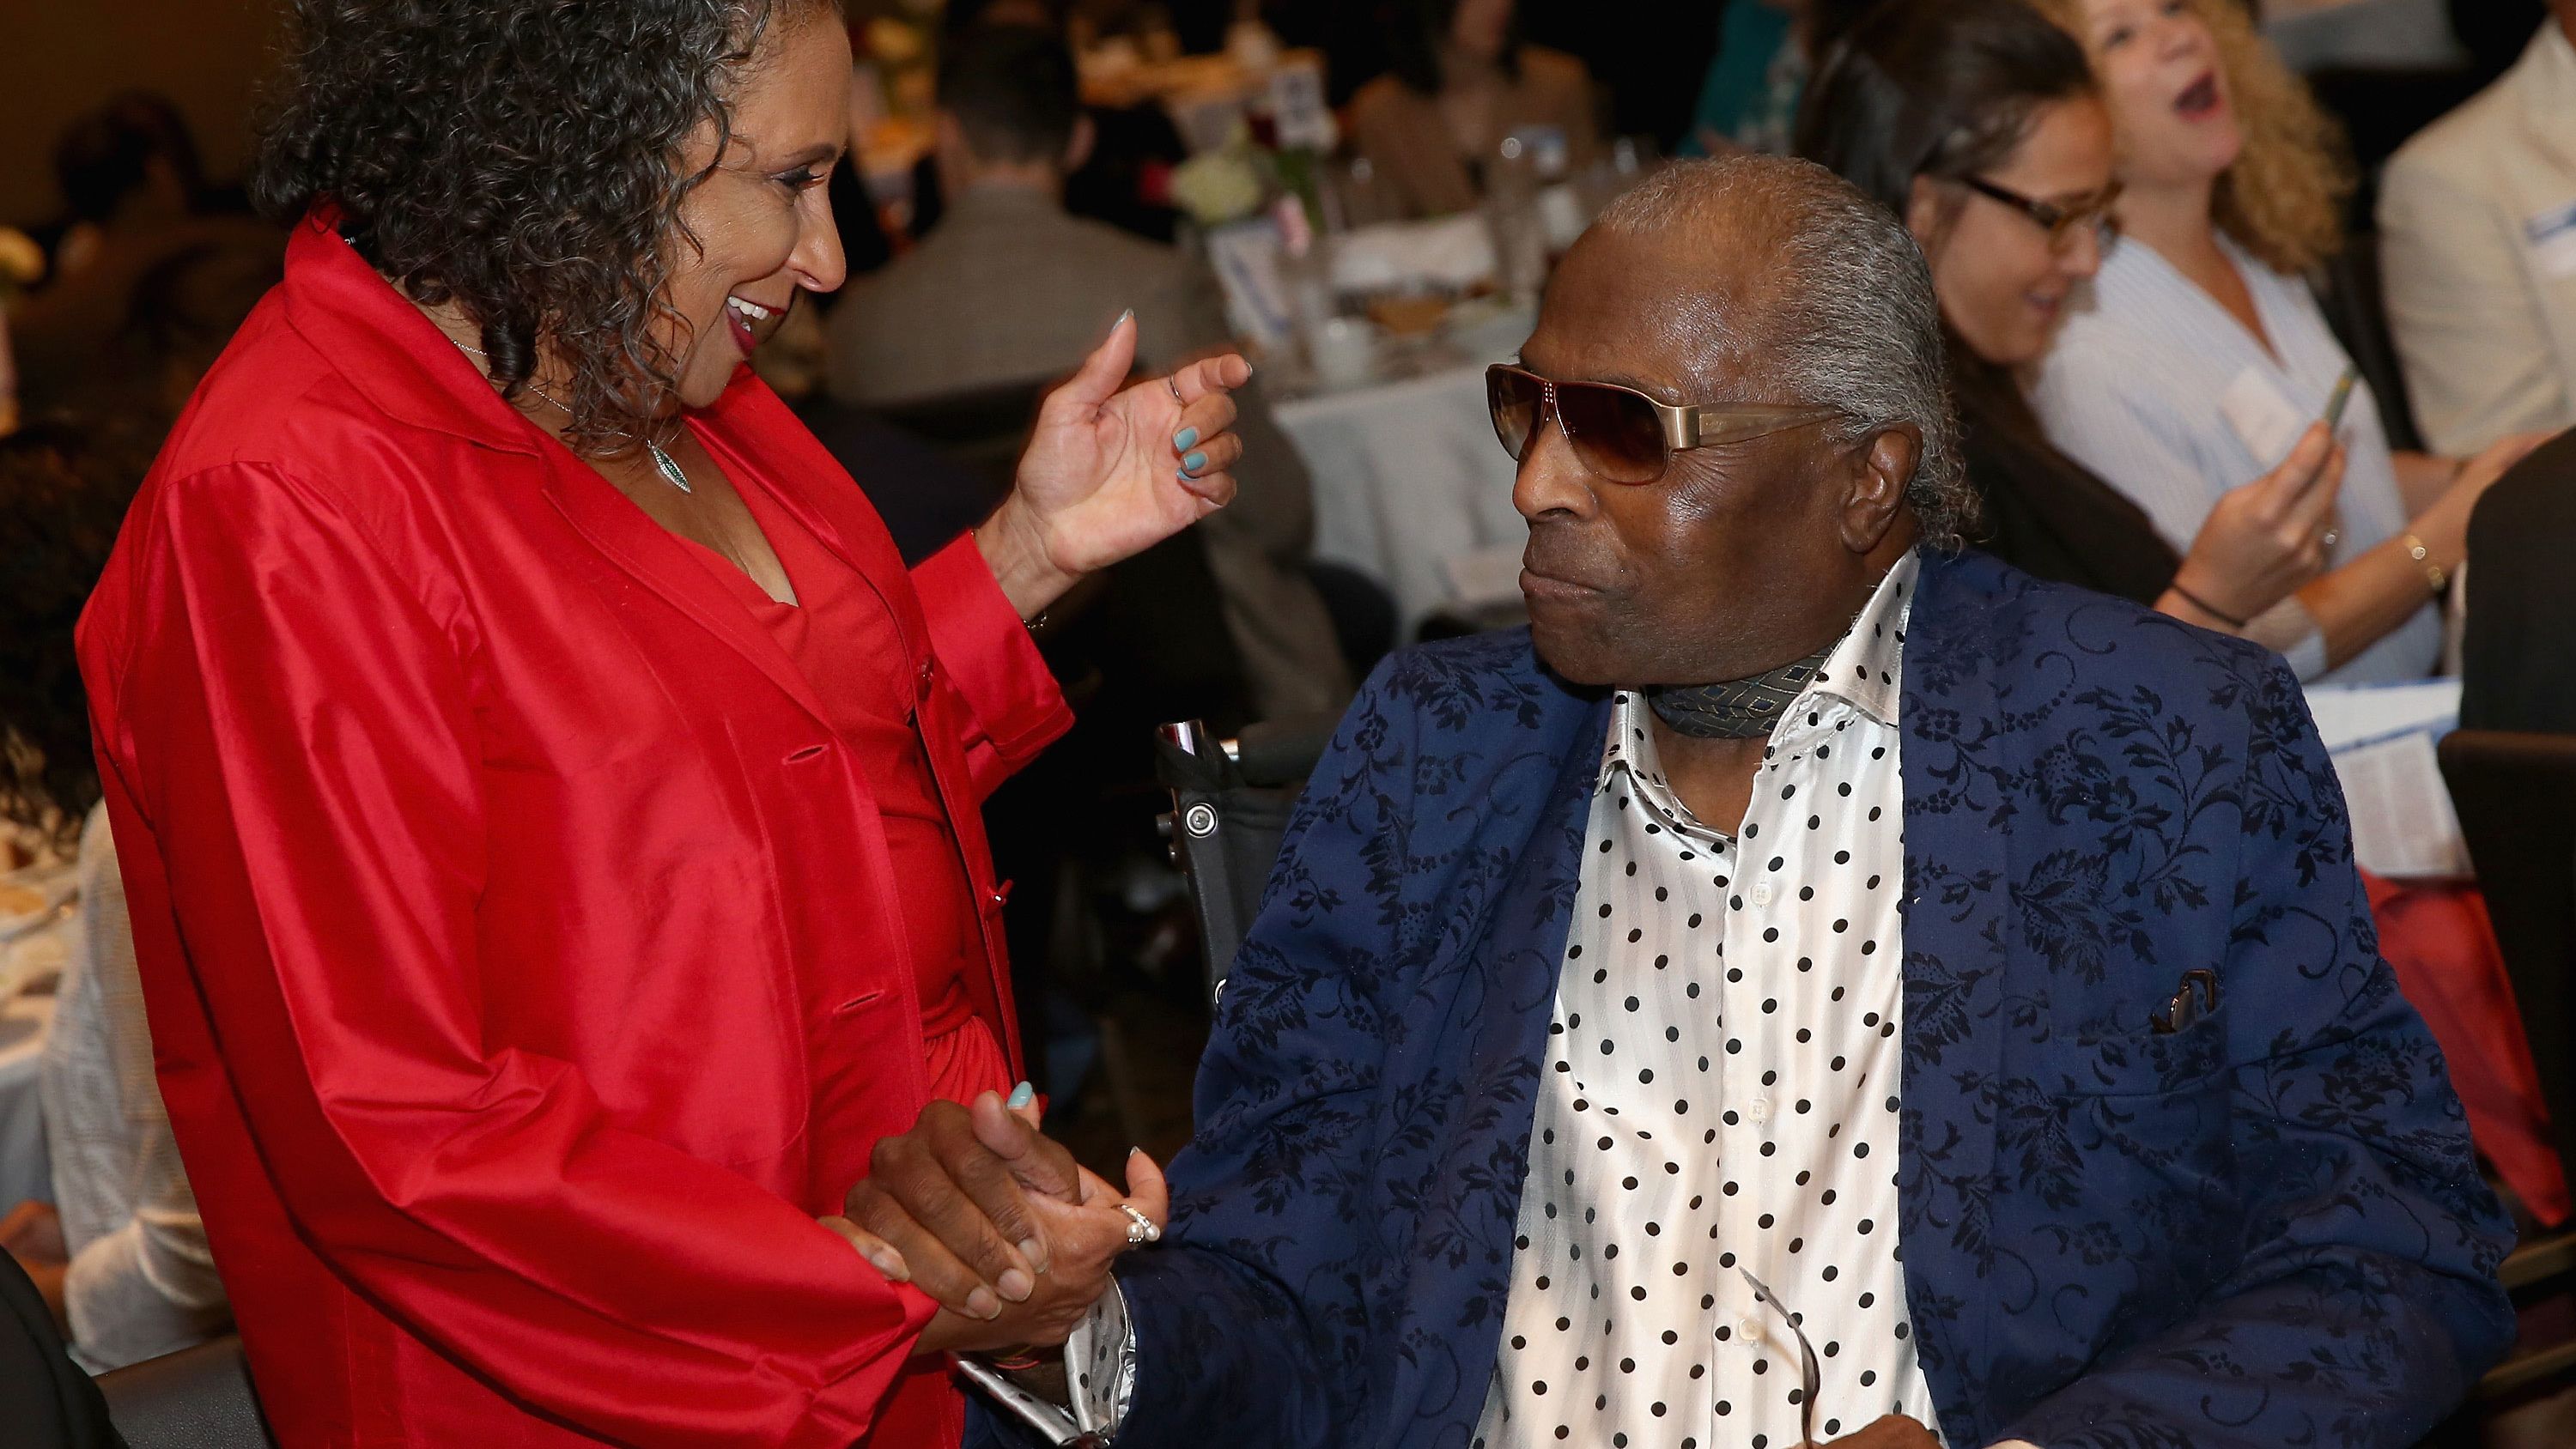 Cathy Hughes speaks with Little Richard during an event at the National Museum of African American Music in Nashville, Tennessee, in 2016.